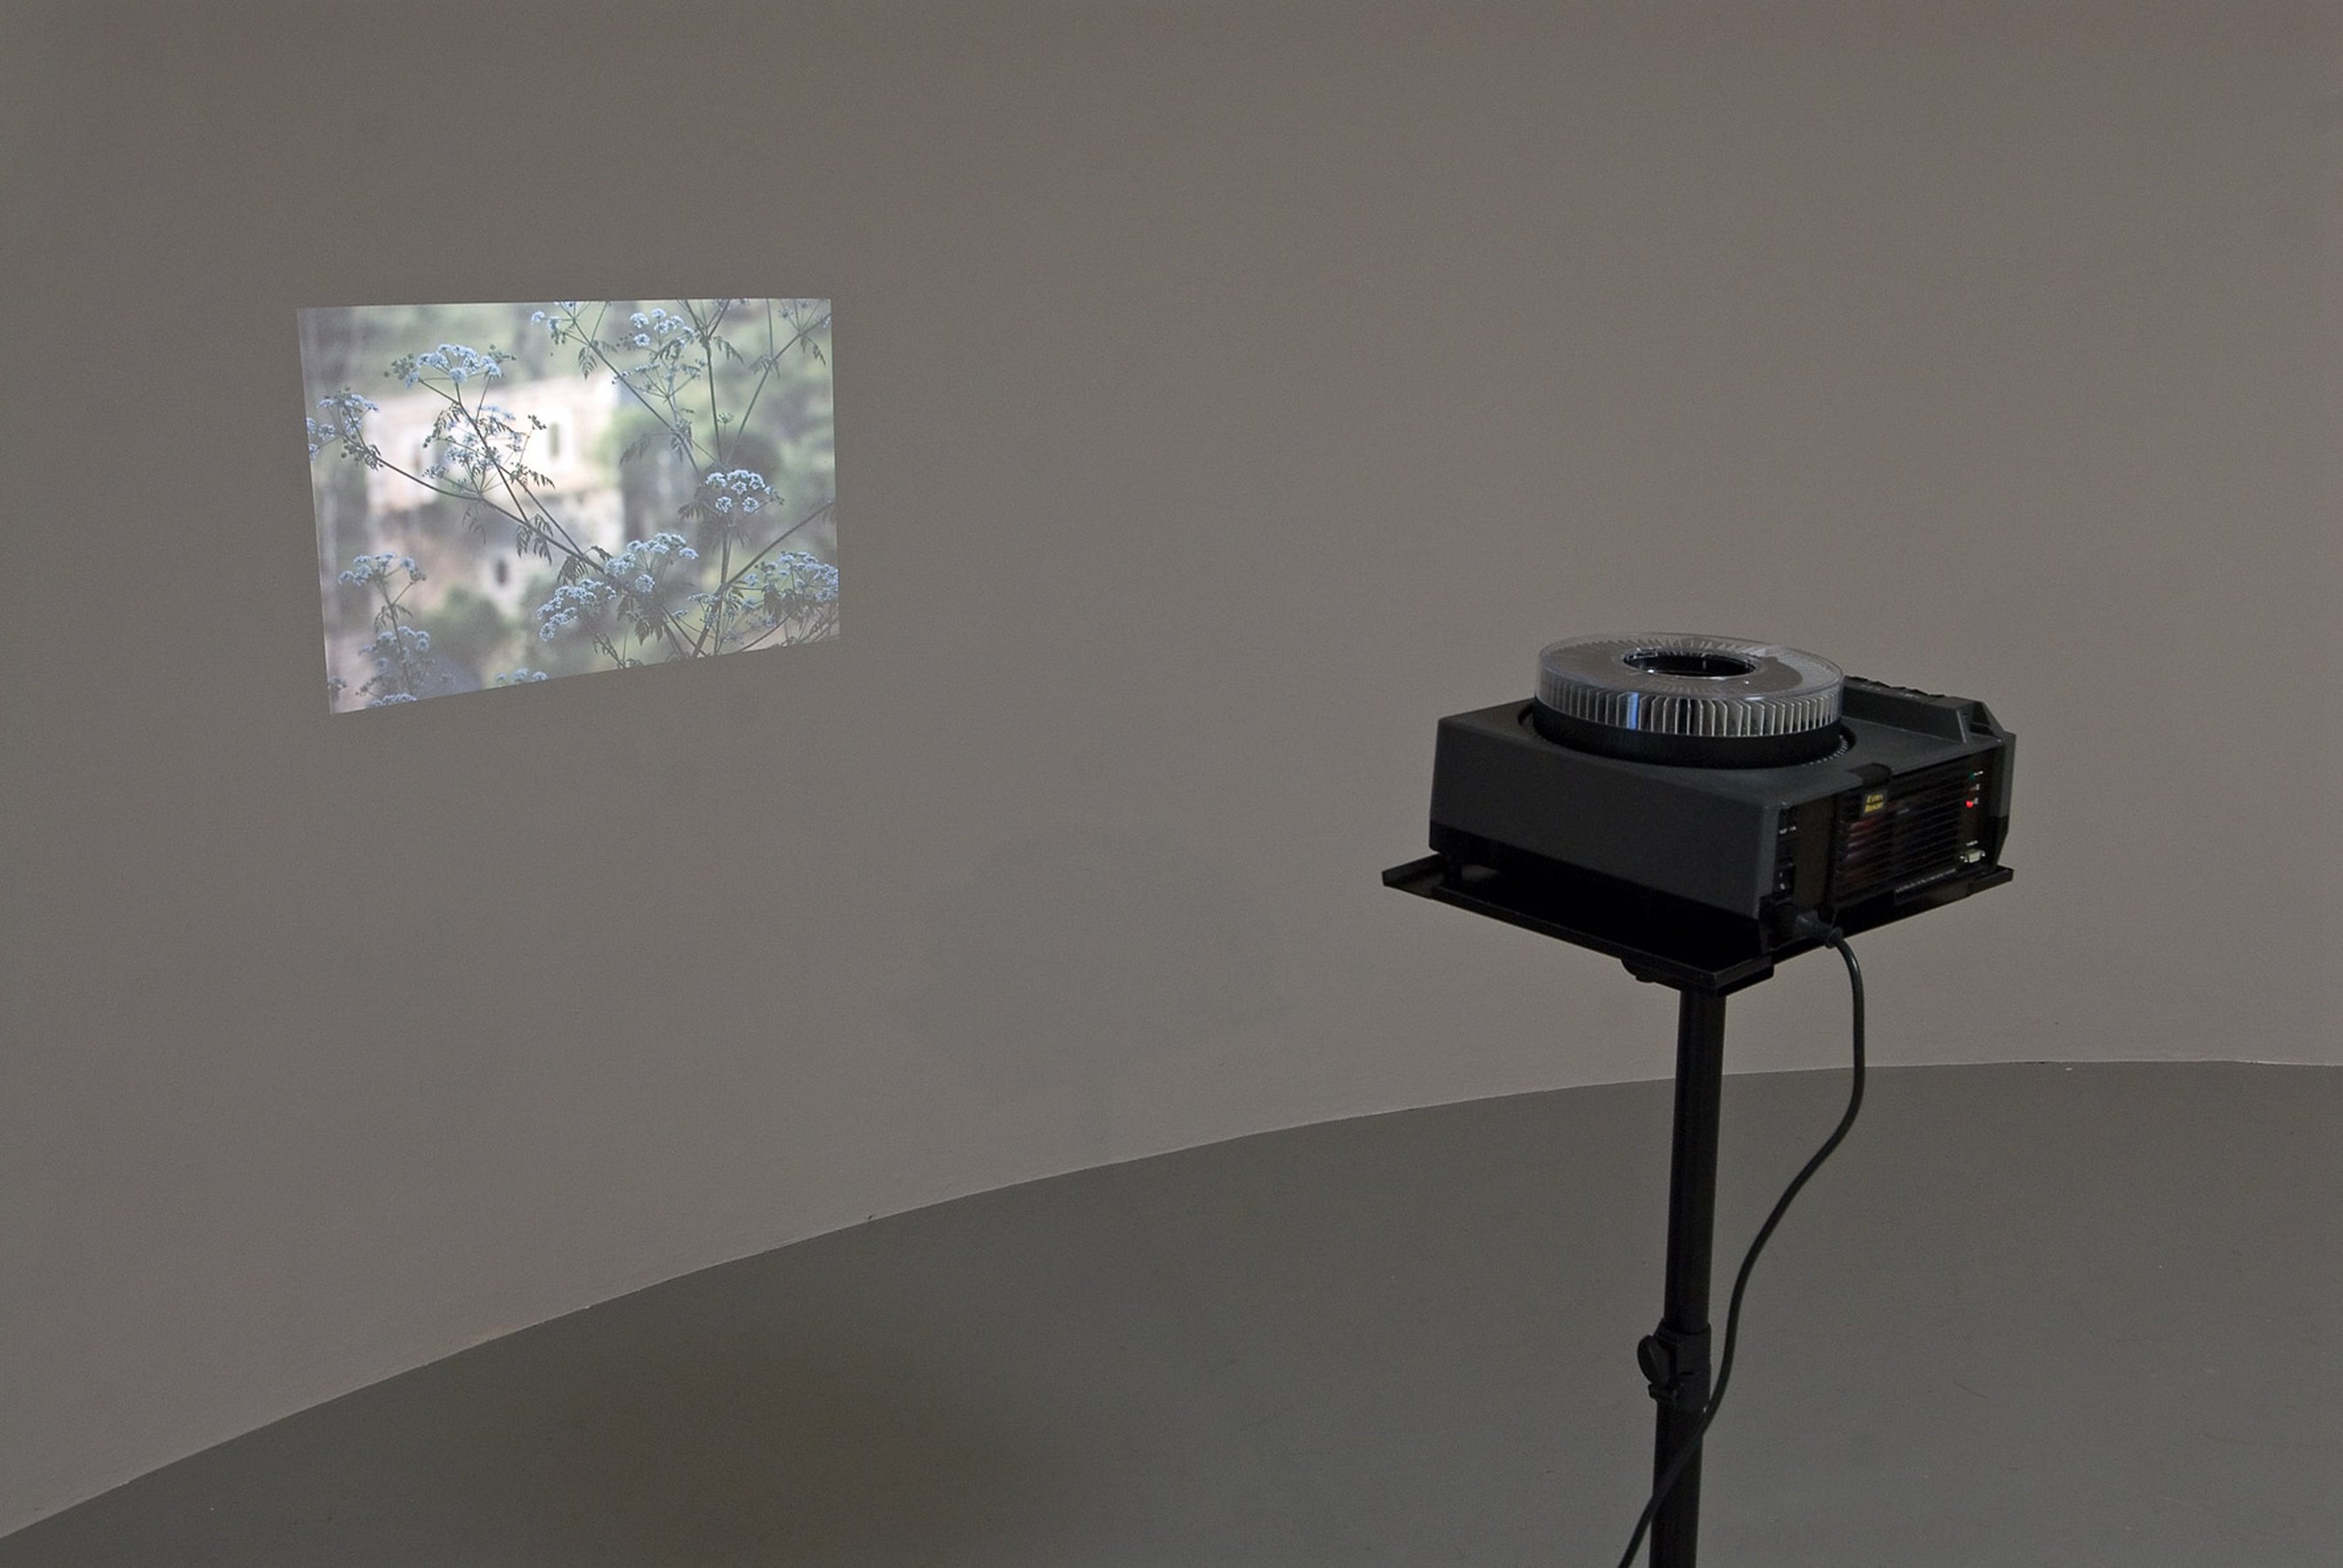 Unmade Film - The Reconnaissance, 2012 - 2013, slide projection